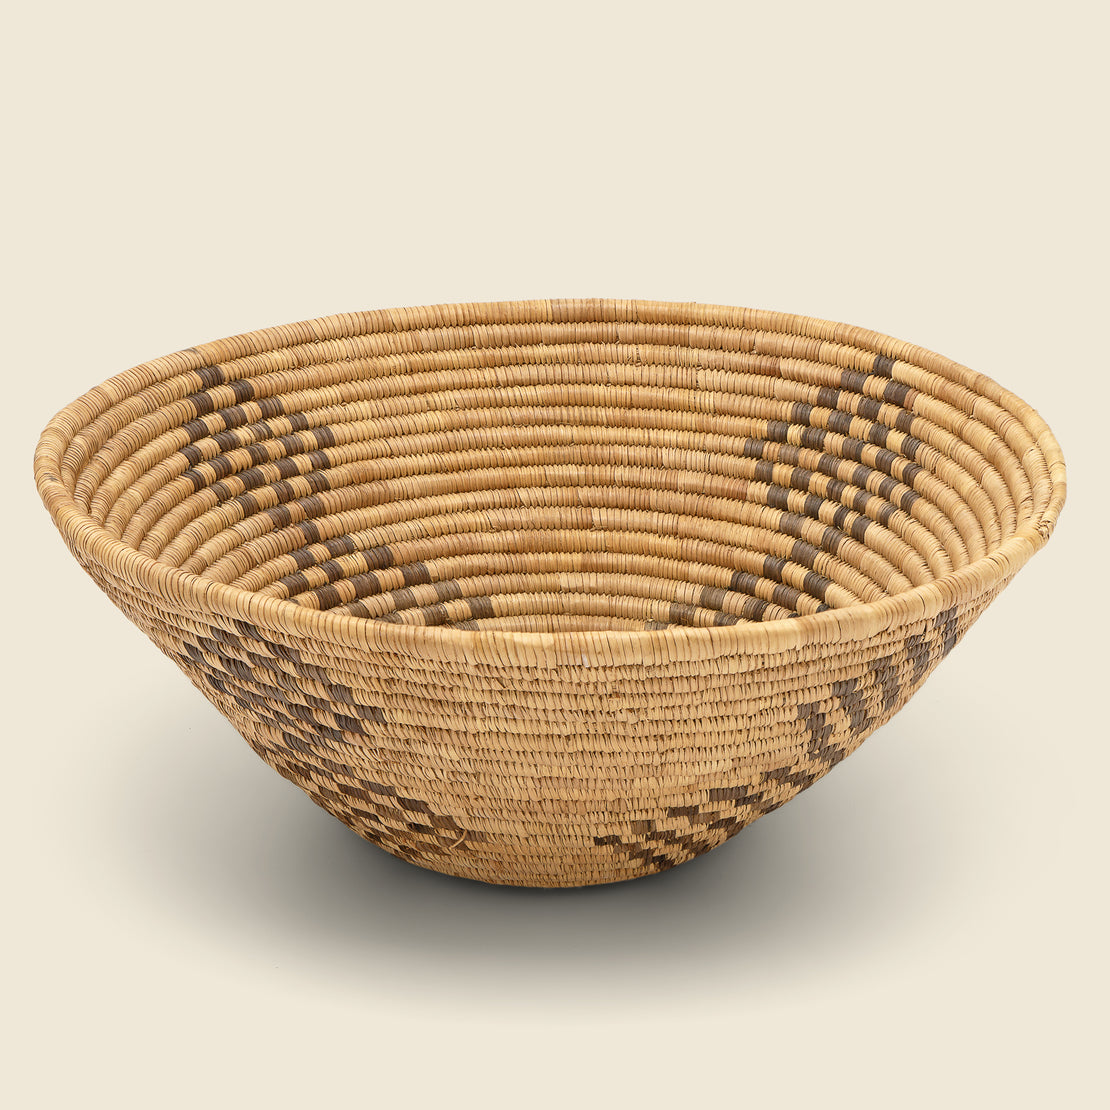 Vintage Papago Style Coiled Basket